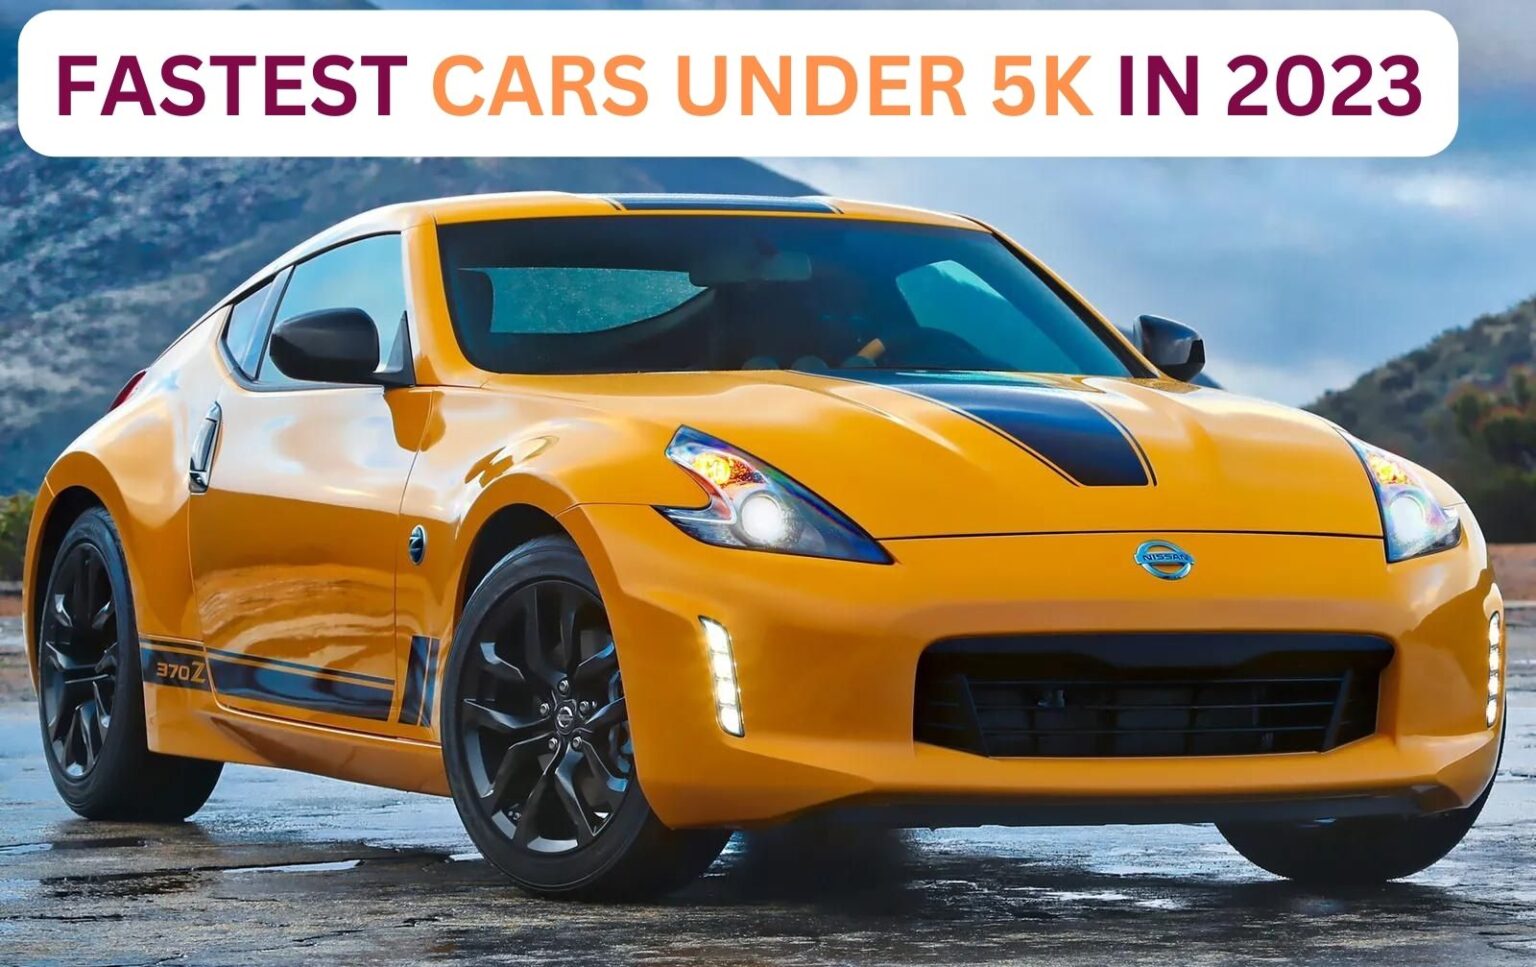 The Topmost Affordable And Fastest cars under 5k In 2023